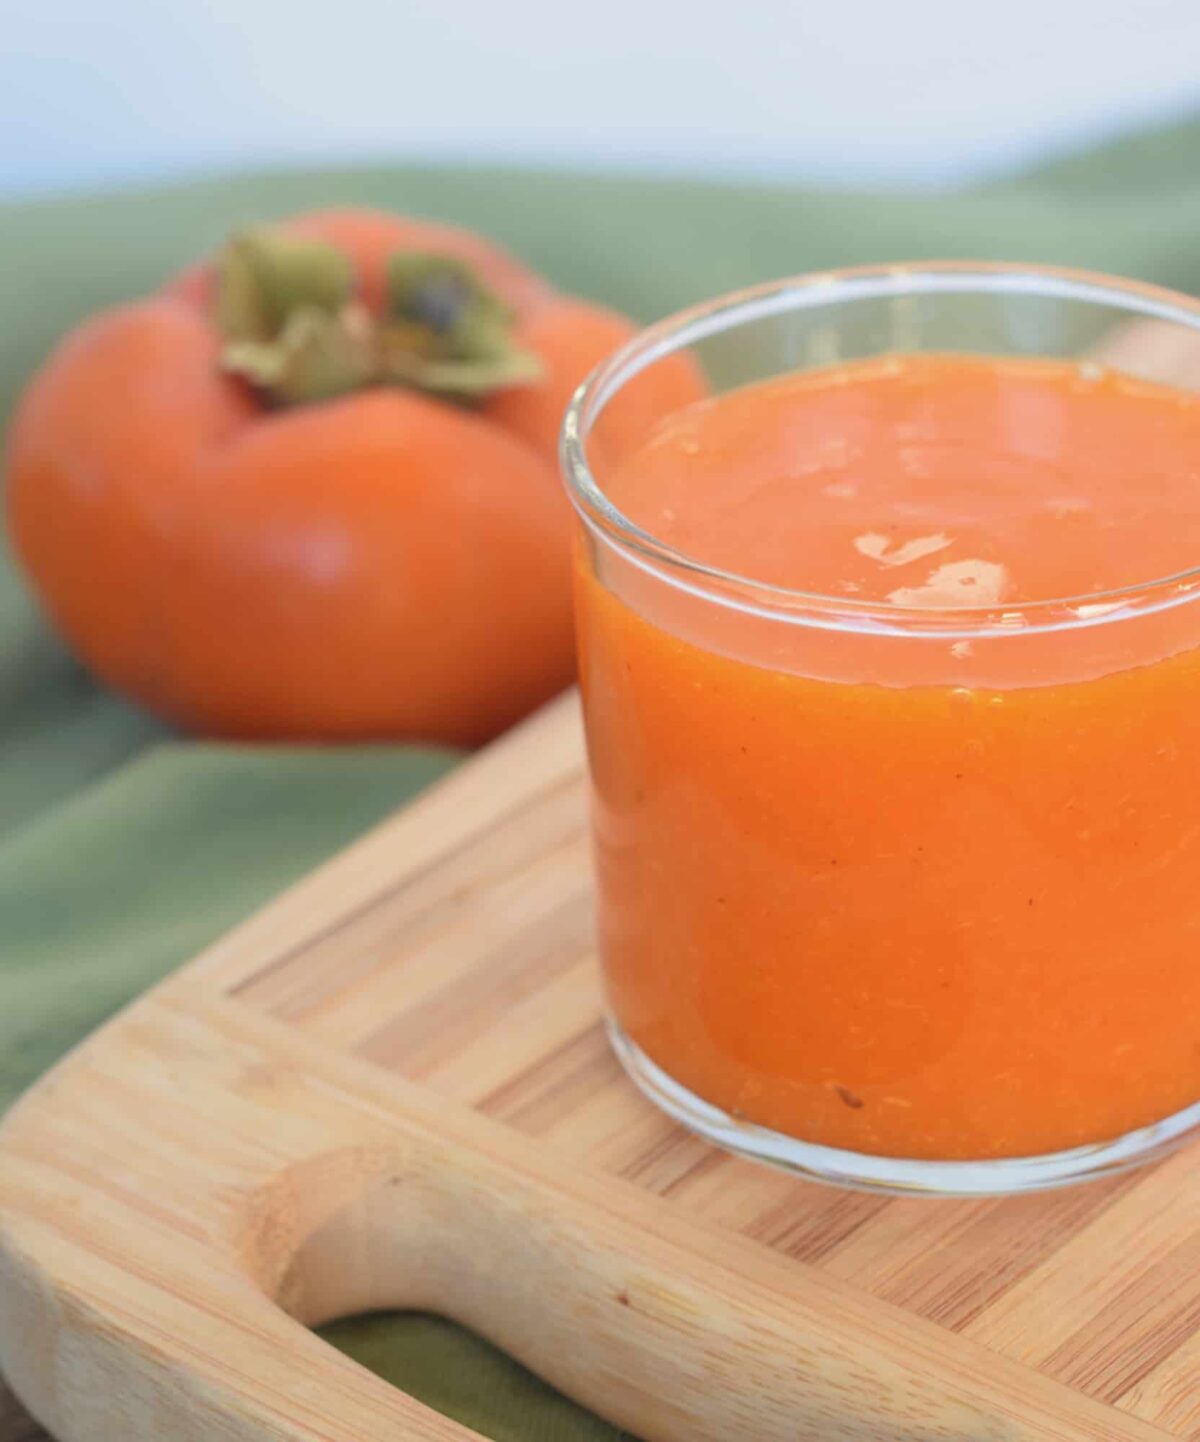 Bright orange persimmon pulp in a glass cup with a persimmon in the background